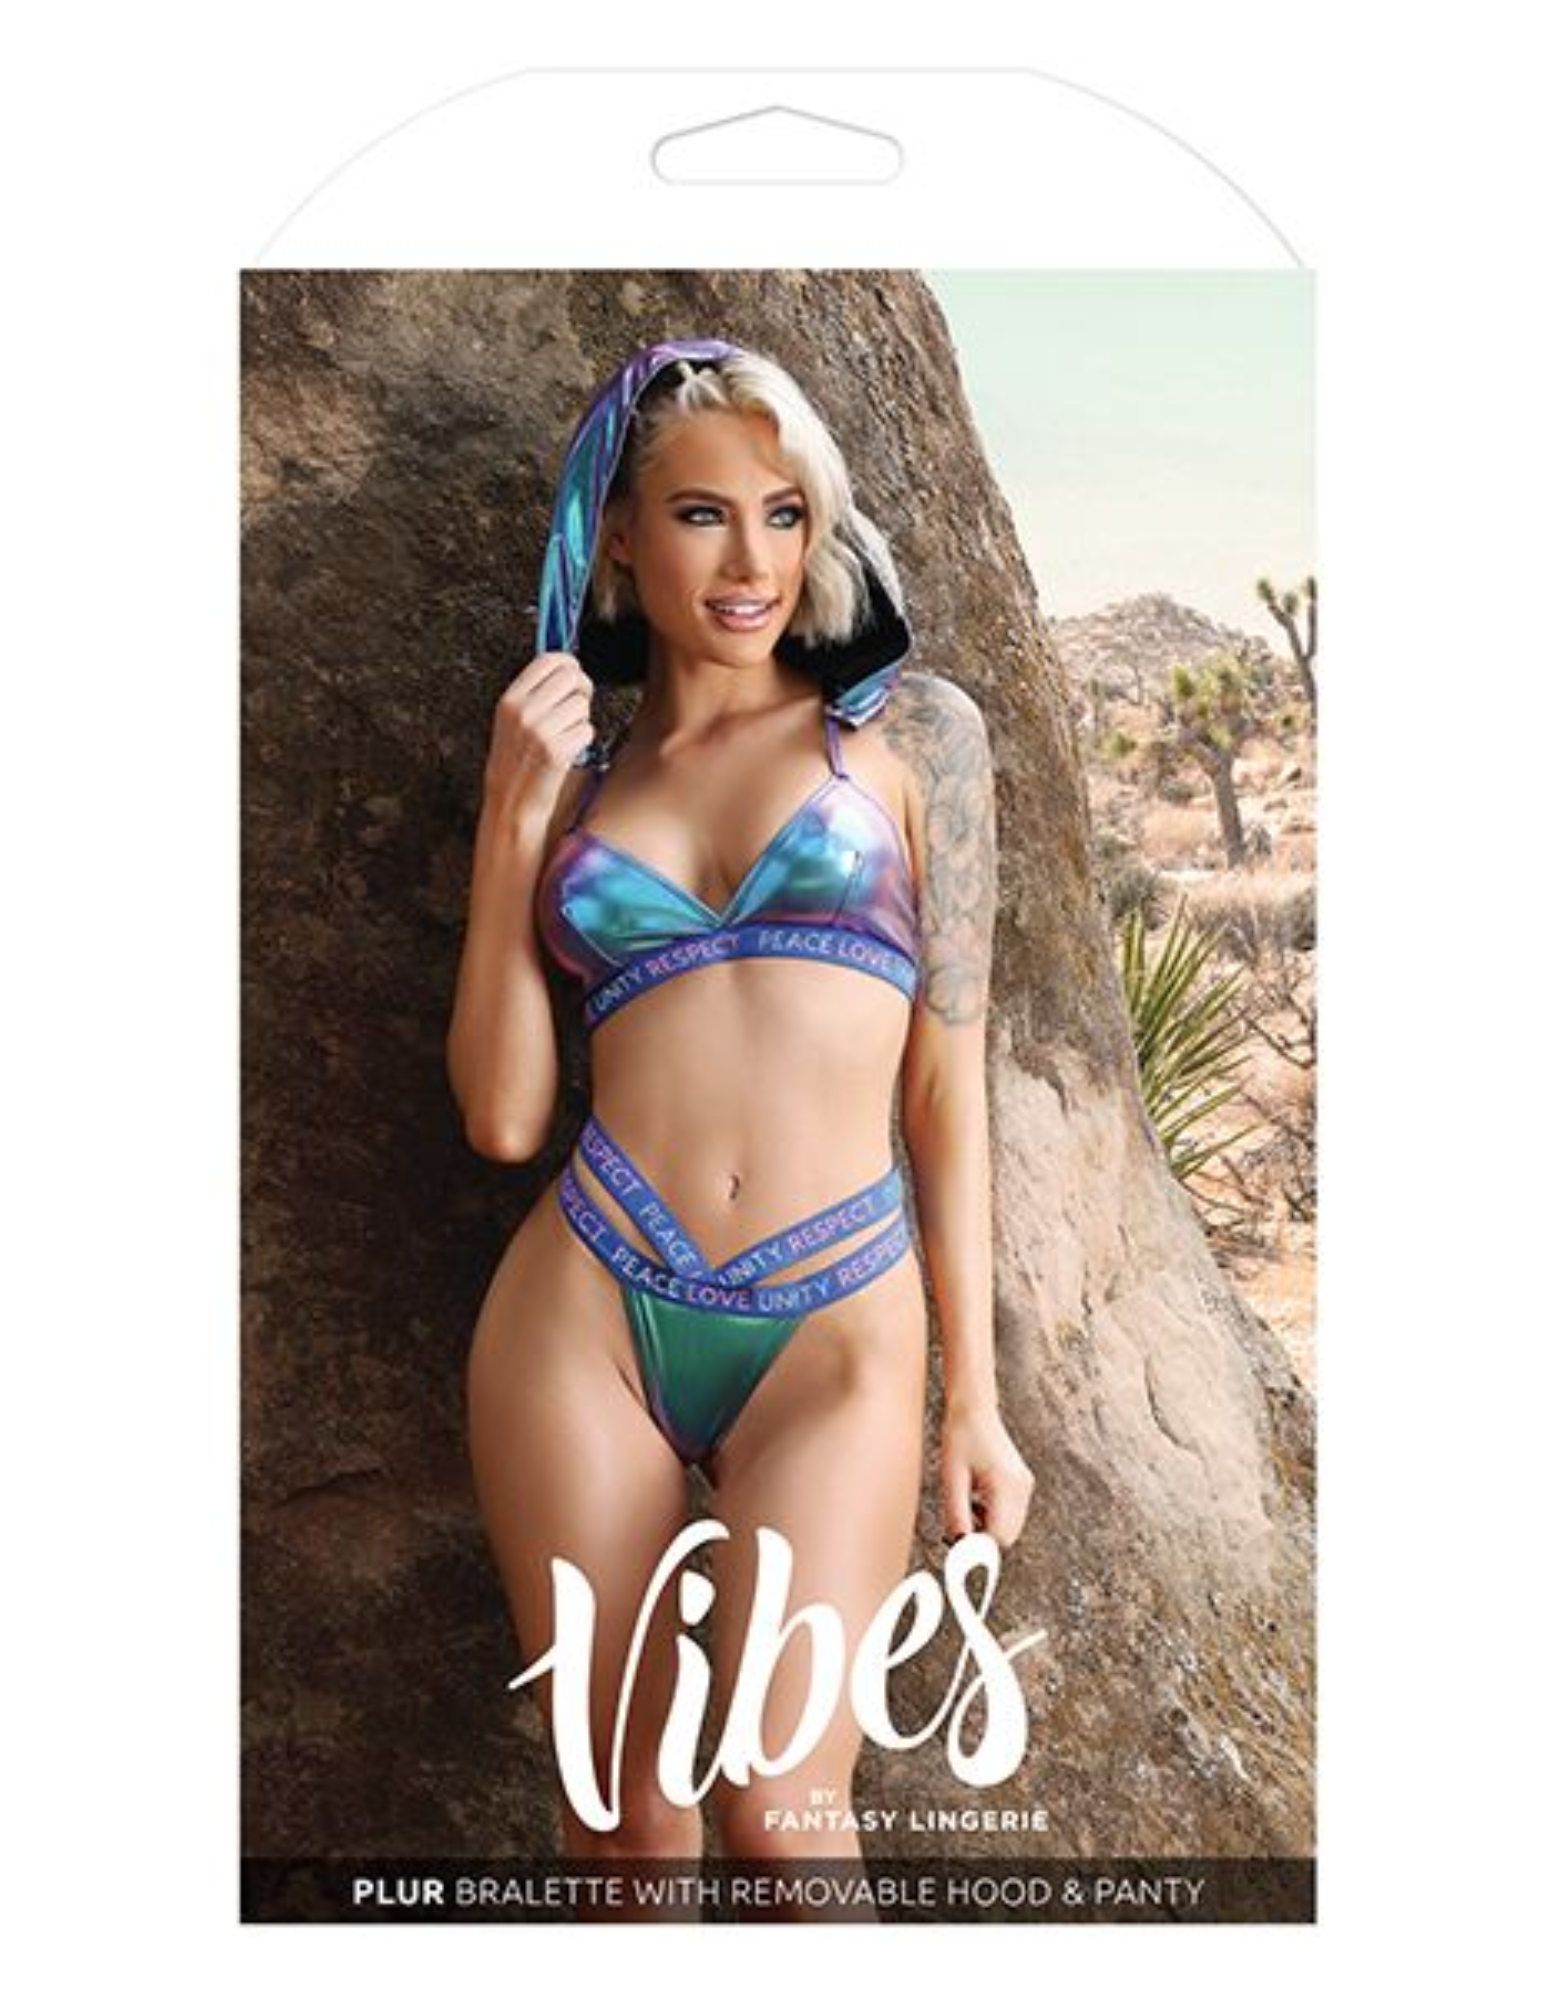 Photo of the front of the box for the Vibes Plur Bralette w/ Removeable Hood and Panty Set from Fantasy Lingerie (S-XL).